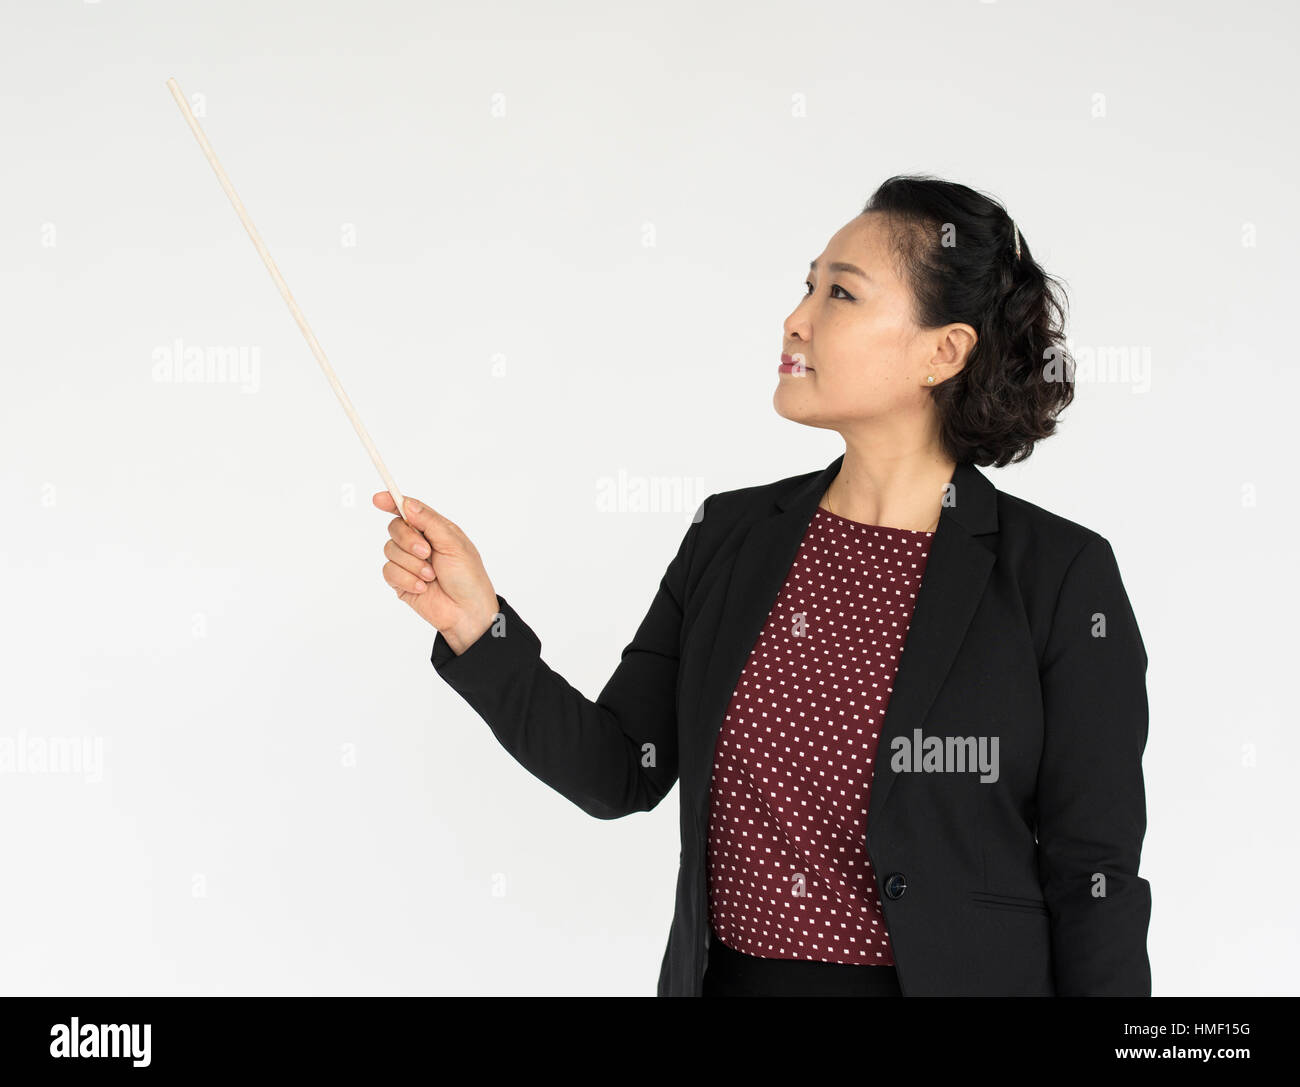 Business Woman Career Cheerful Confident Concept Stock Photo